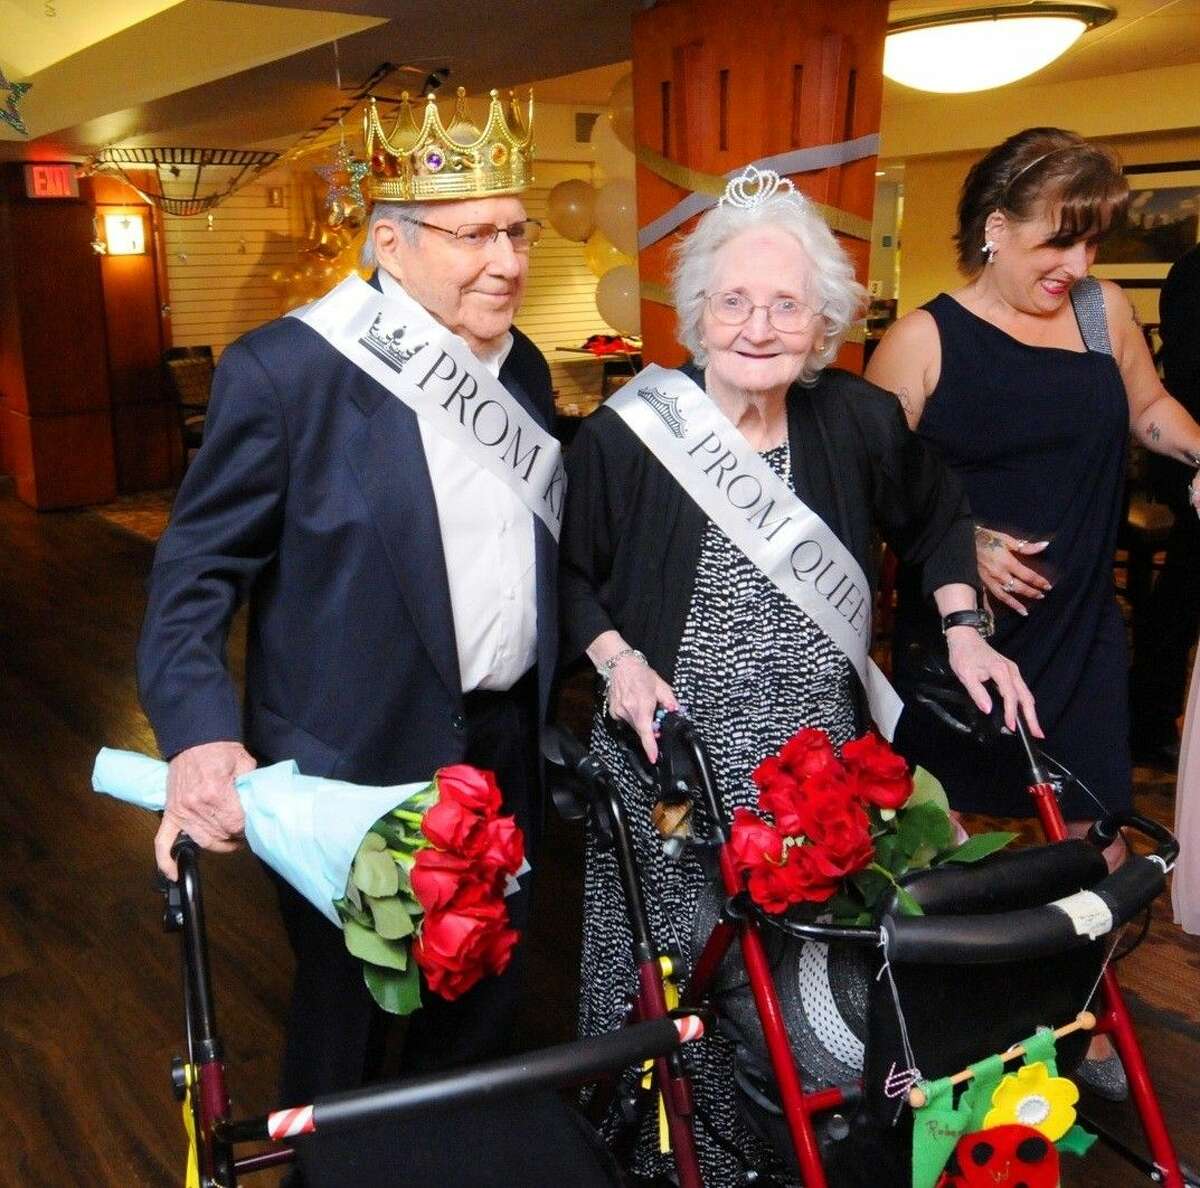 Brookdale Willowbrook Park, an assisted senior living community, held its prom on Saturday, May 2, complete with the crowning of a king and queen.